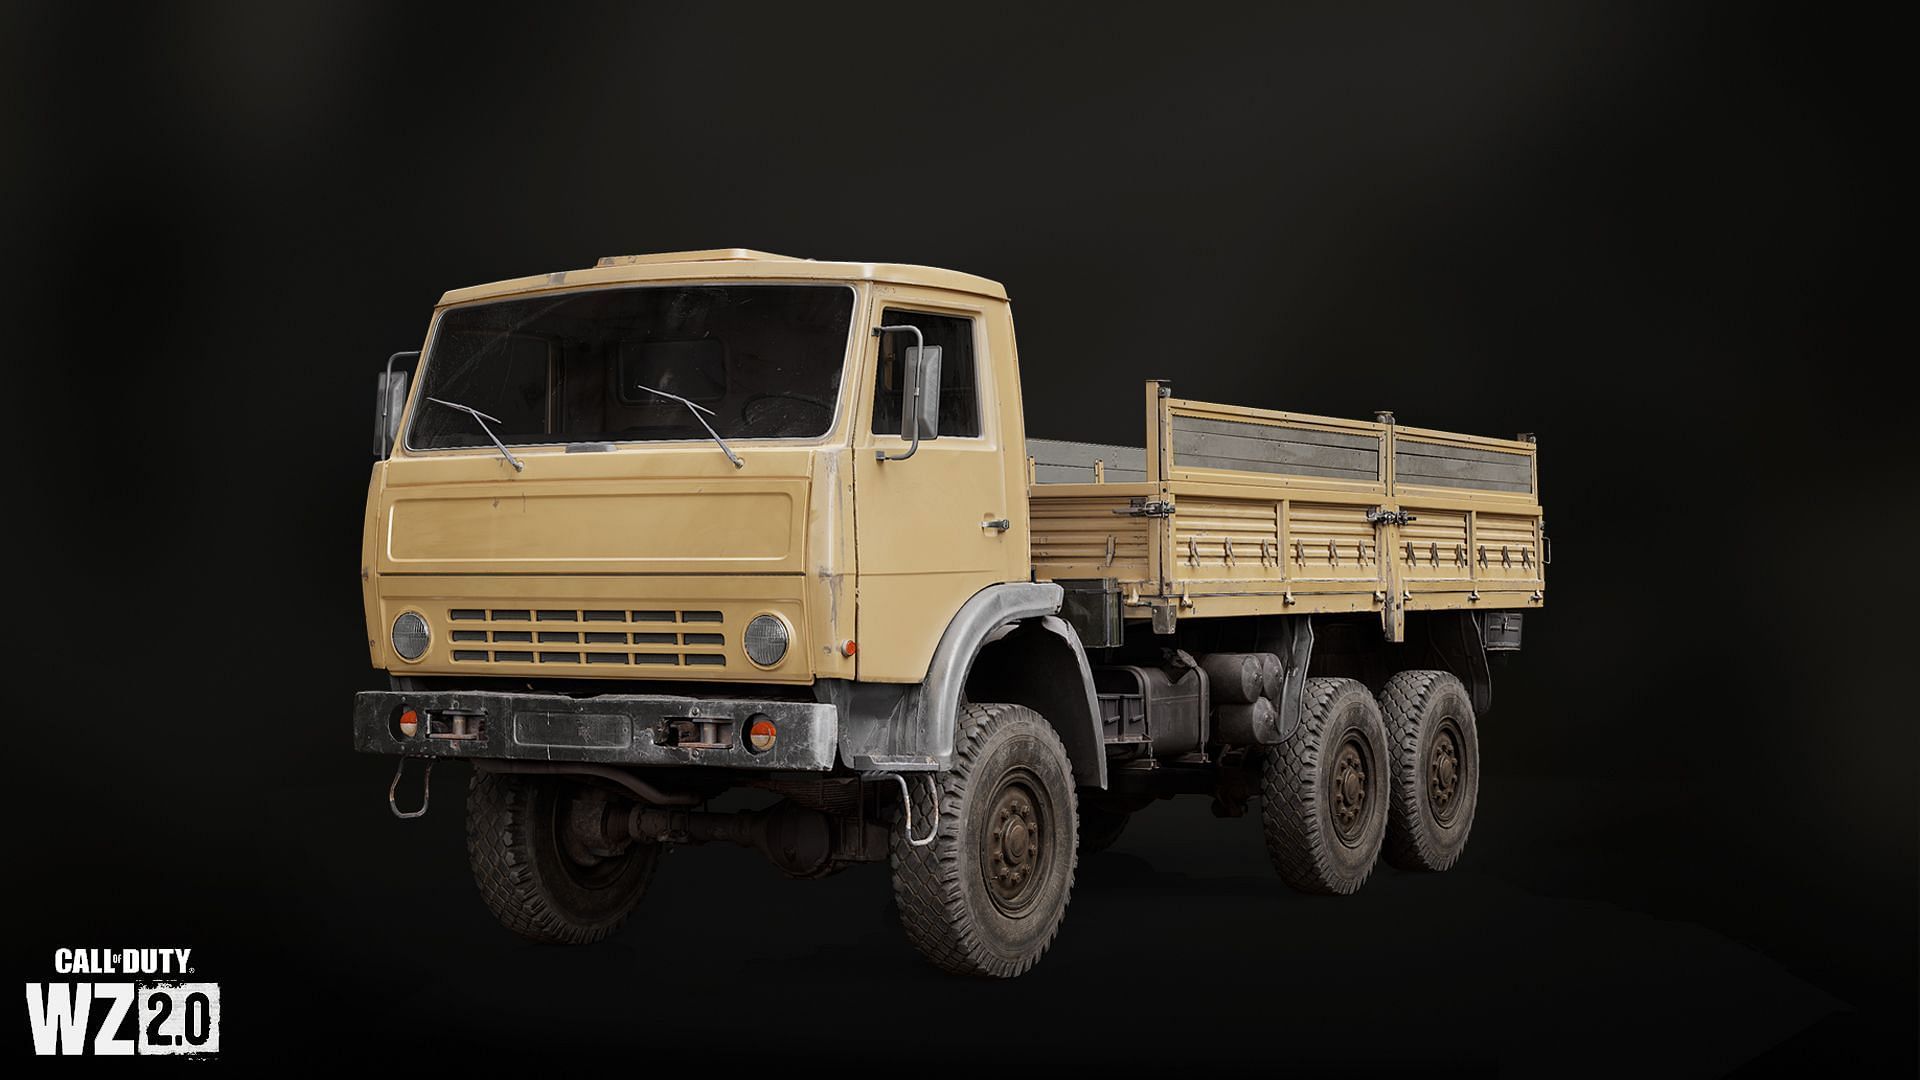 The Cargo truck (Image via Activision)